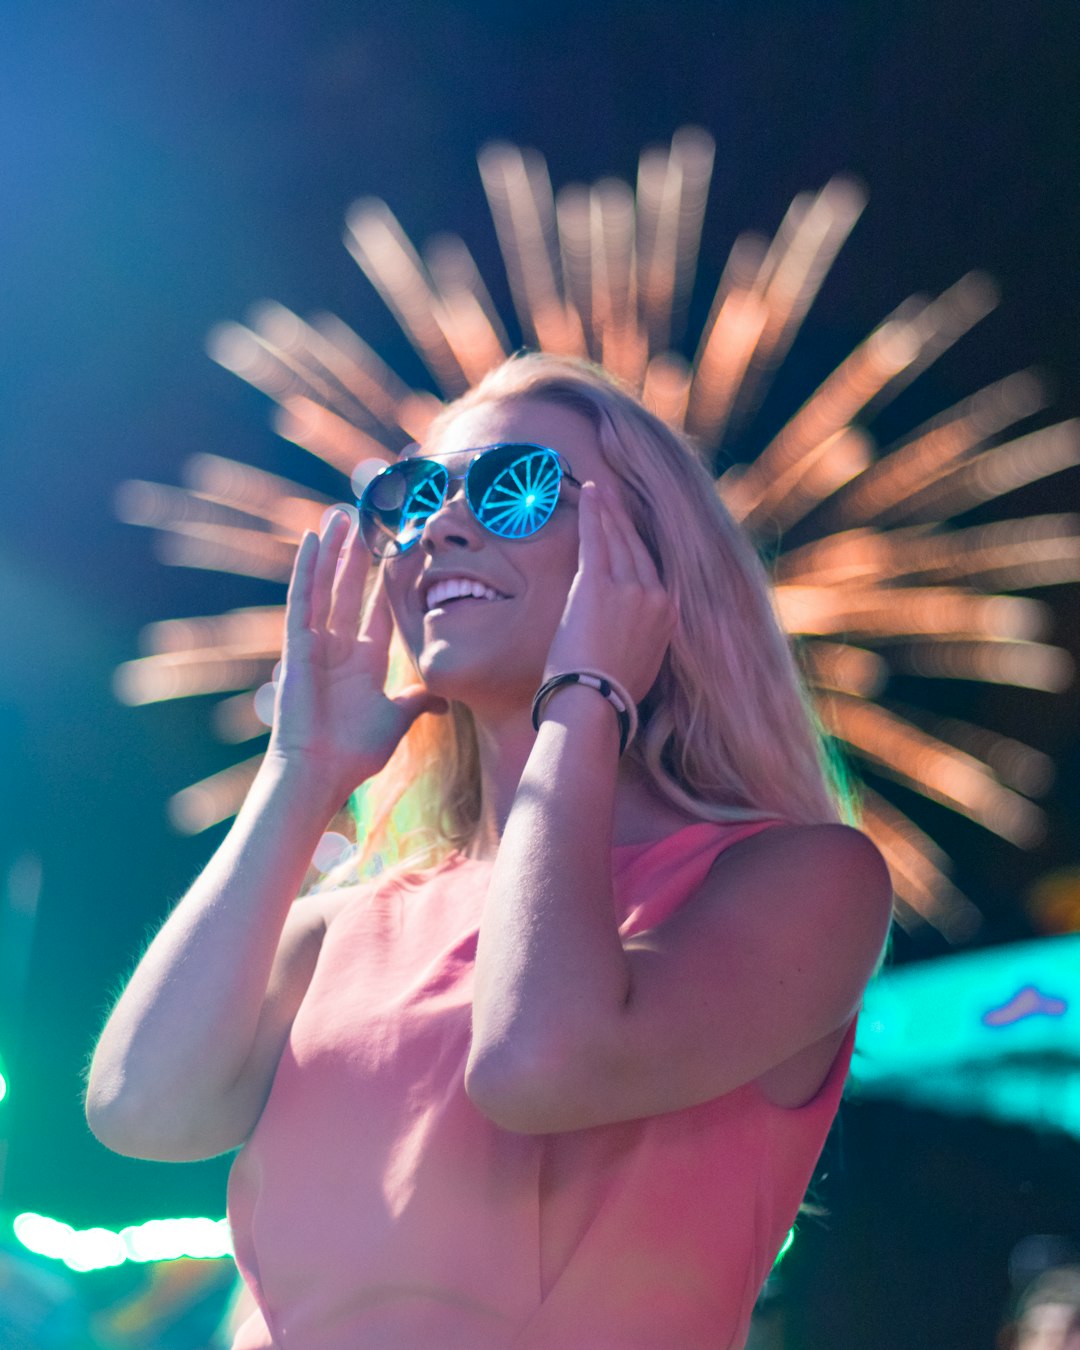 woman wearing sunglasses looking on fireworks during night time